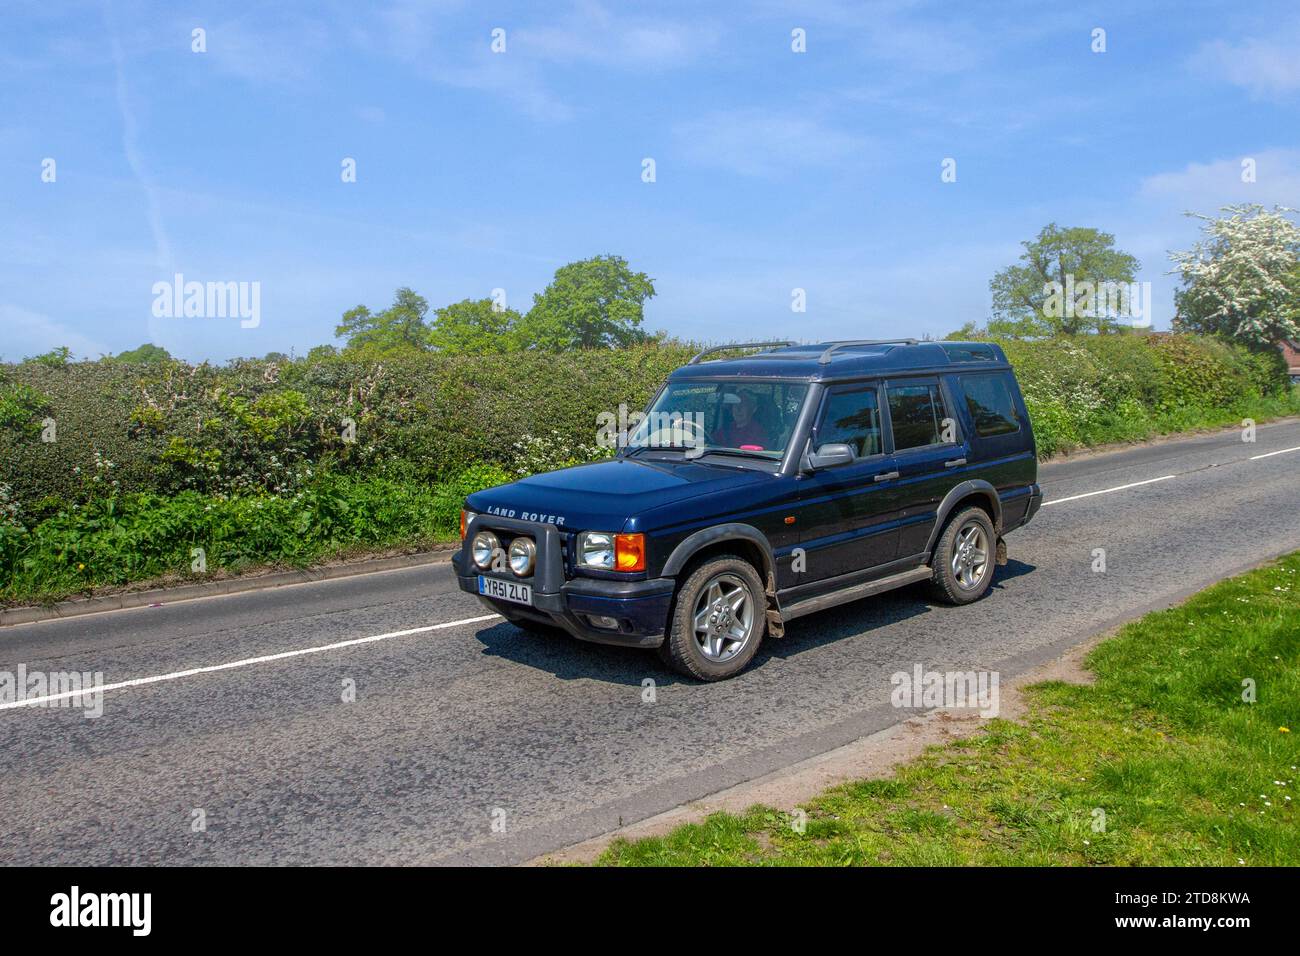 2001 Blue Land Rover Discovery Td5 Es Auto Td5 138 Auto Car Hardtop Diesel 2495 cc. Vintage  expedition leisure, British off-road 4x4, rugged off-road all-terrain overland rally adventure vehicle, LandRover Discovery Turbo Diesel UK Stock Photo